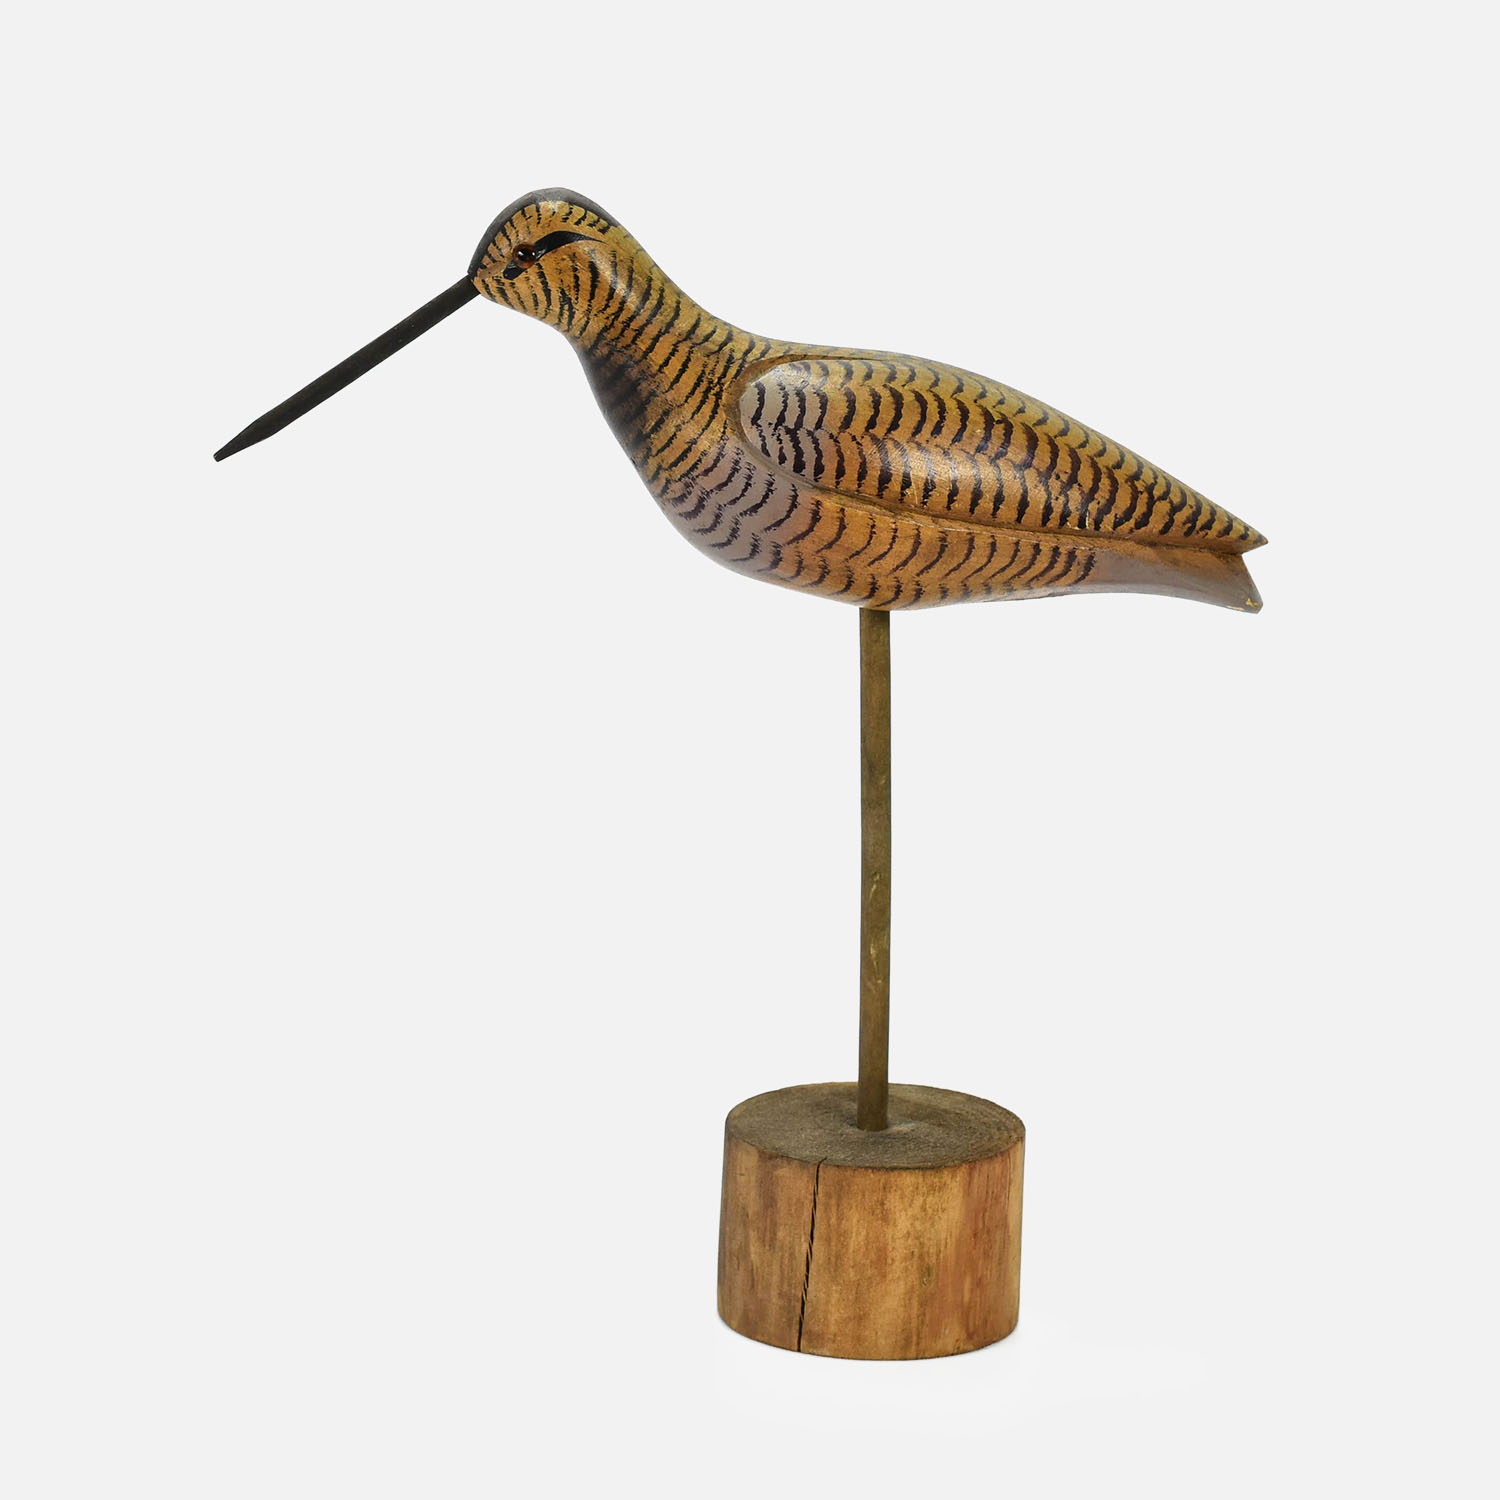 Signed and Dated Carved Wood Shorebird Decoy #2